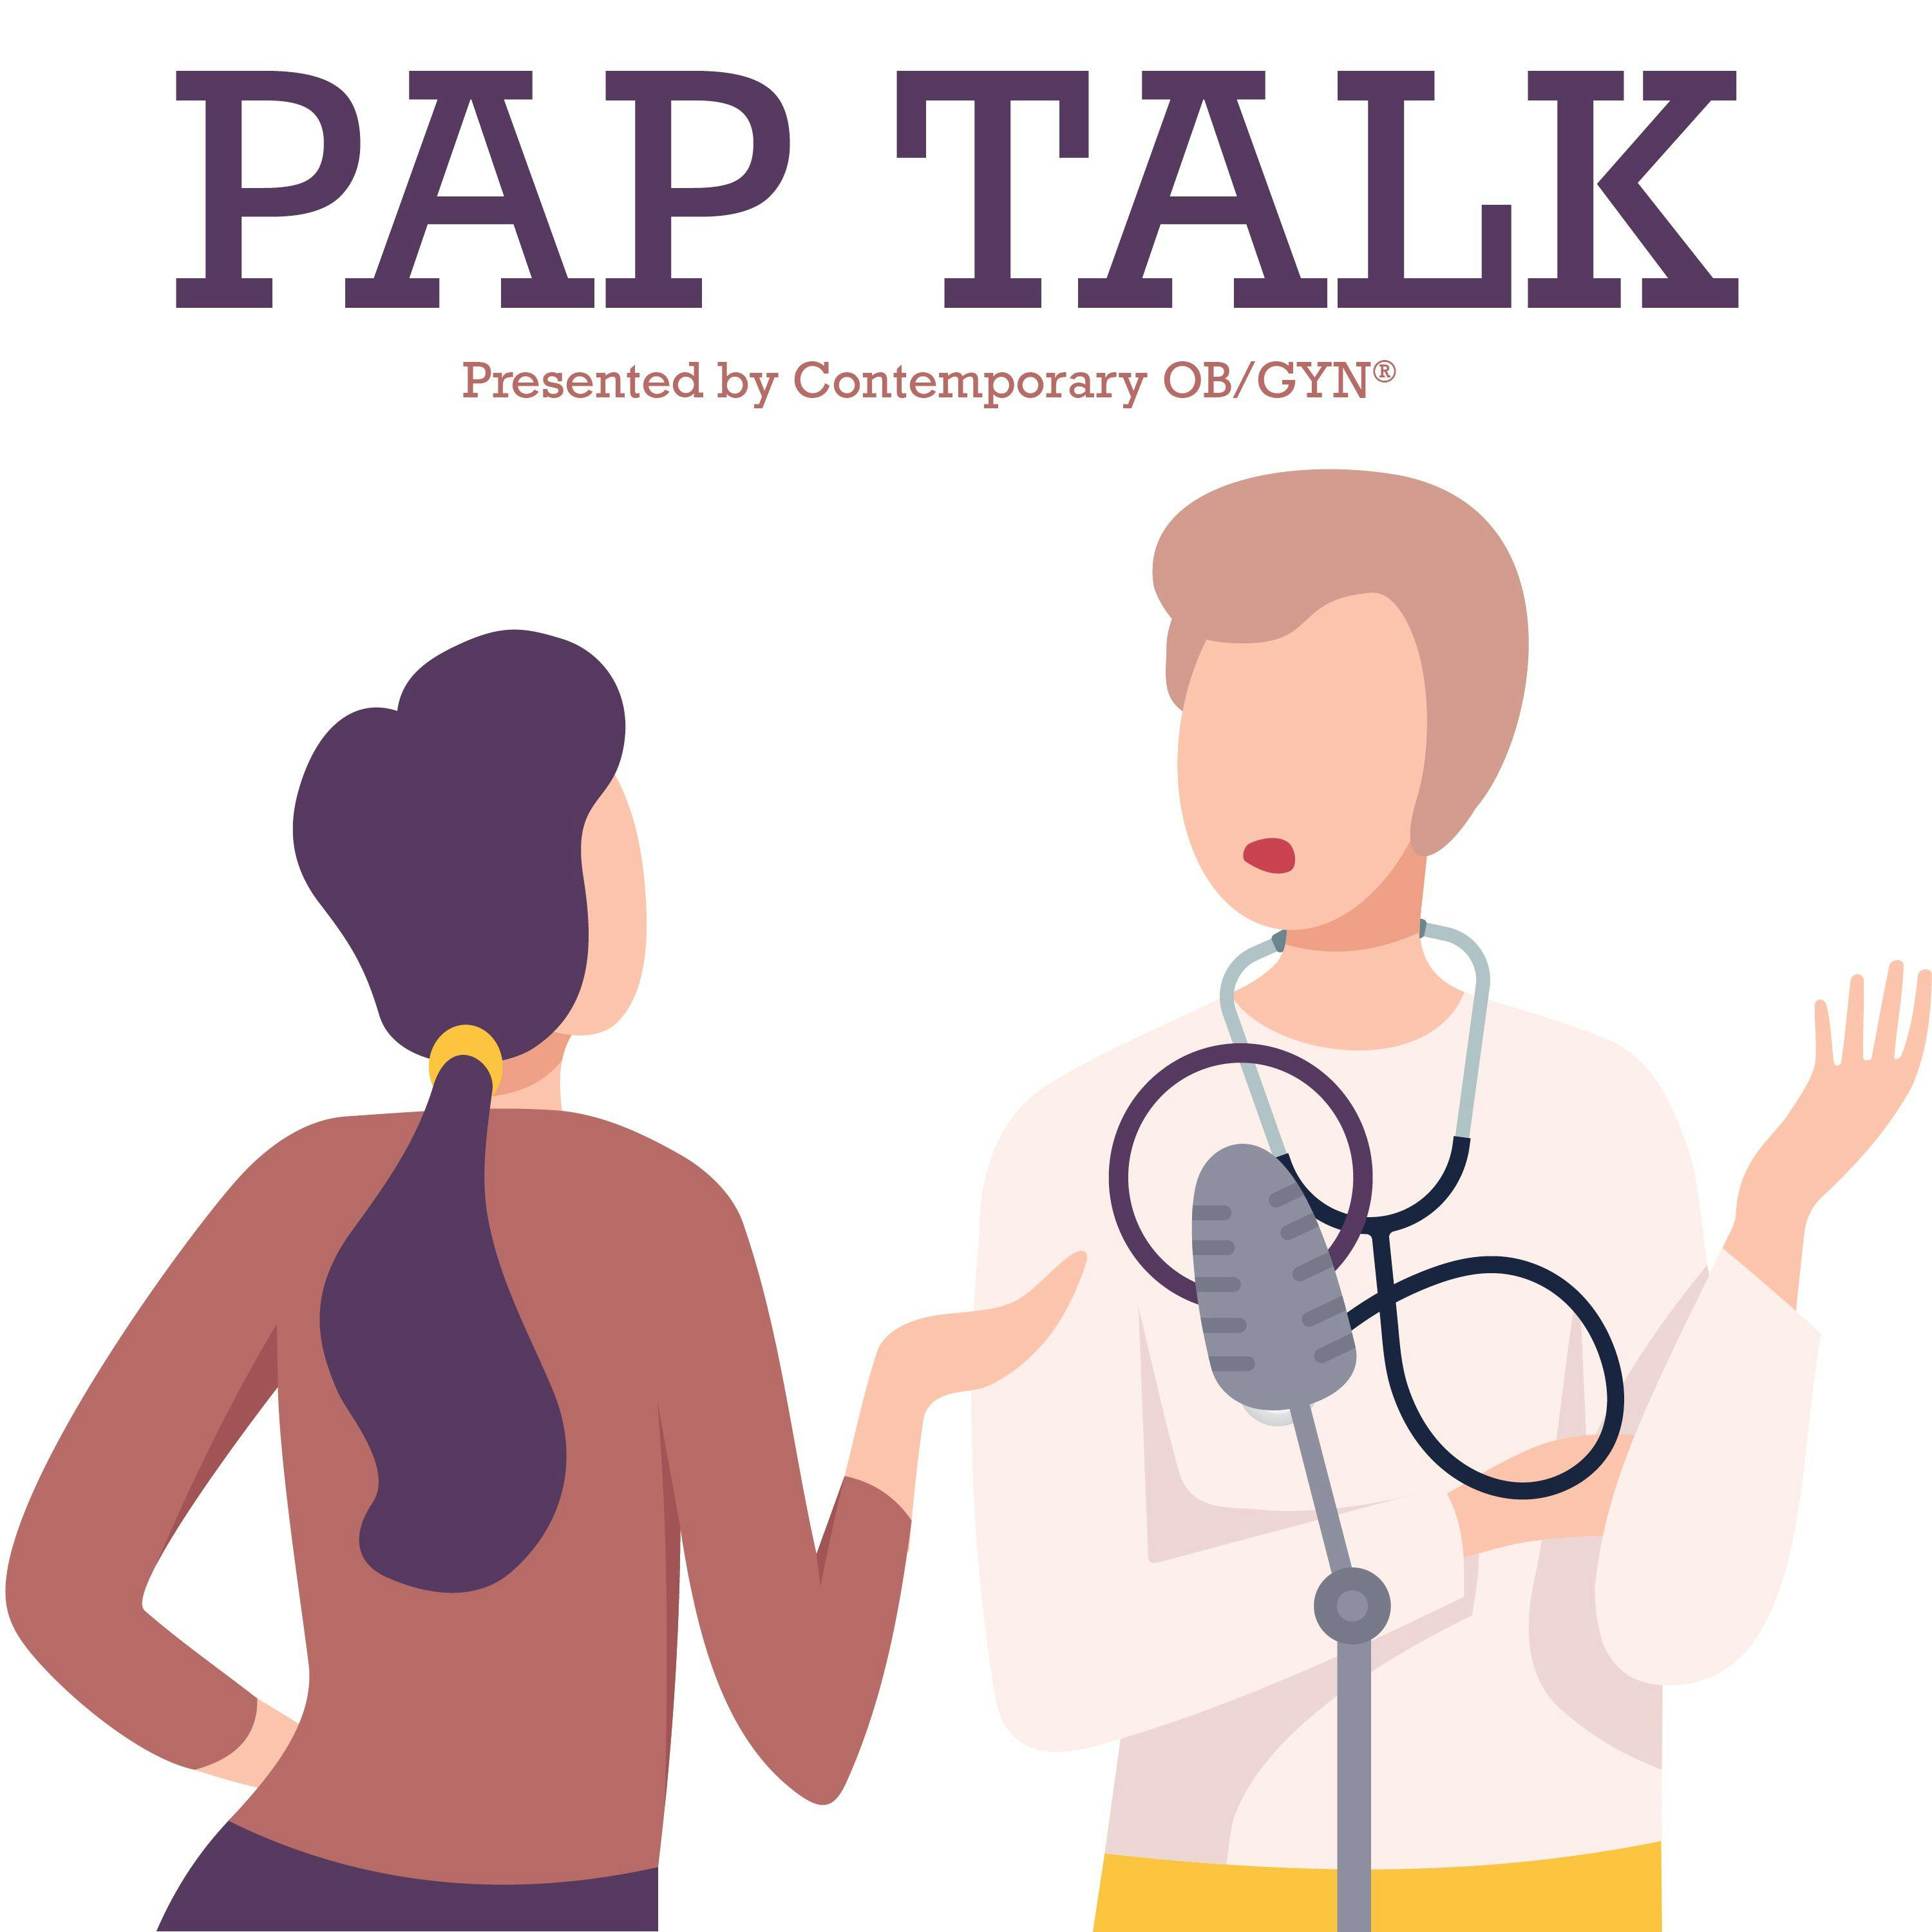 Pap Talk by Contemporary OB/GYN